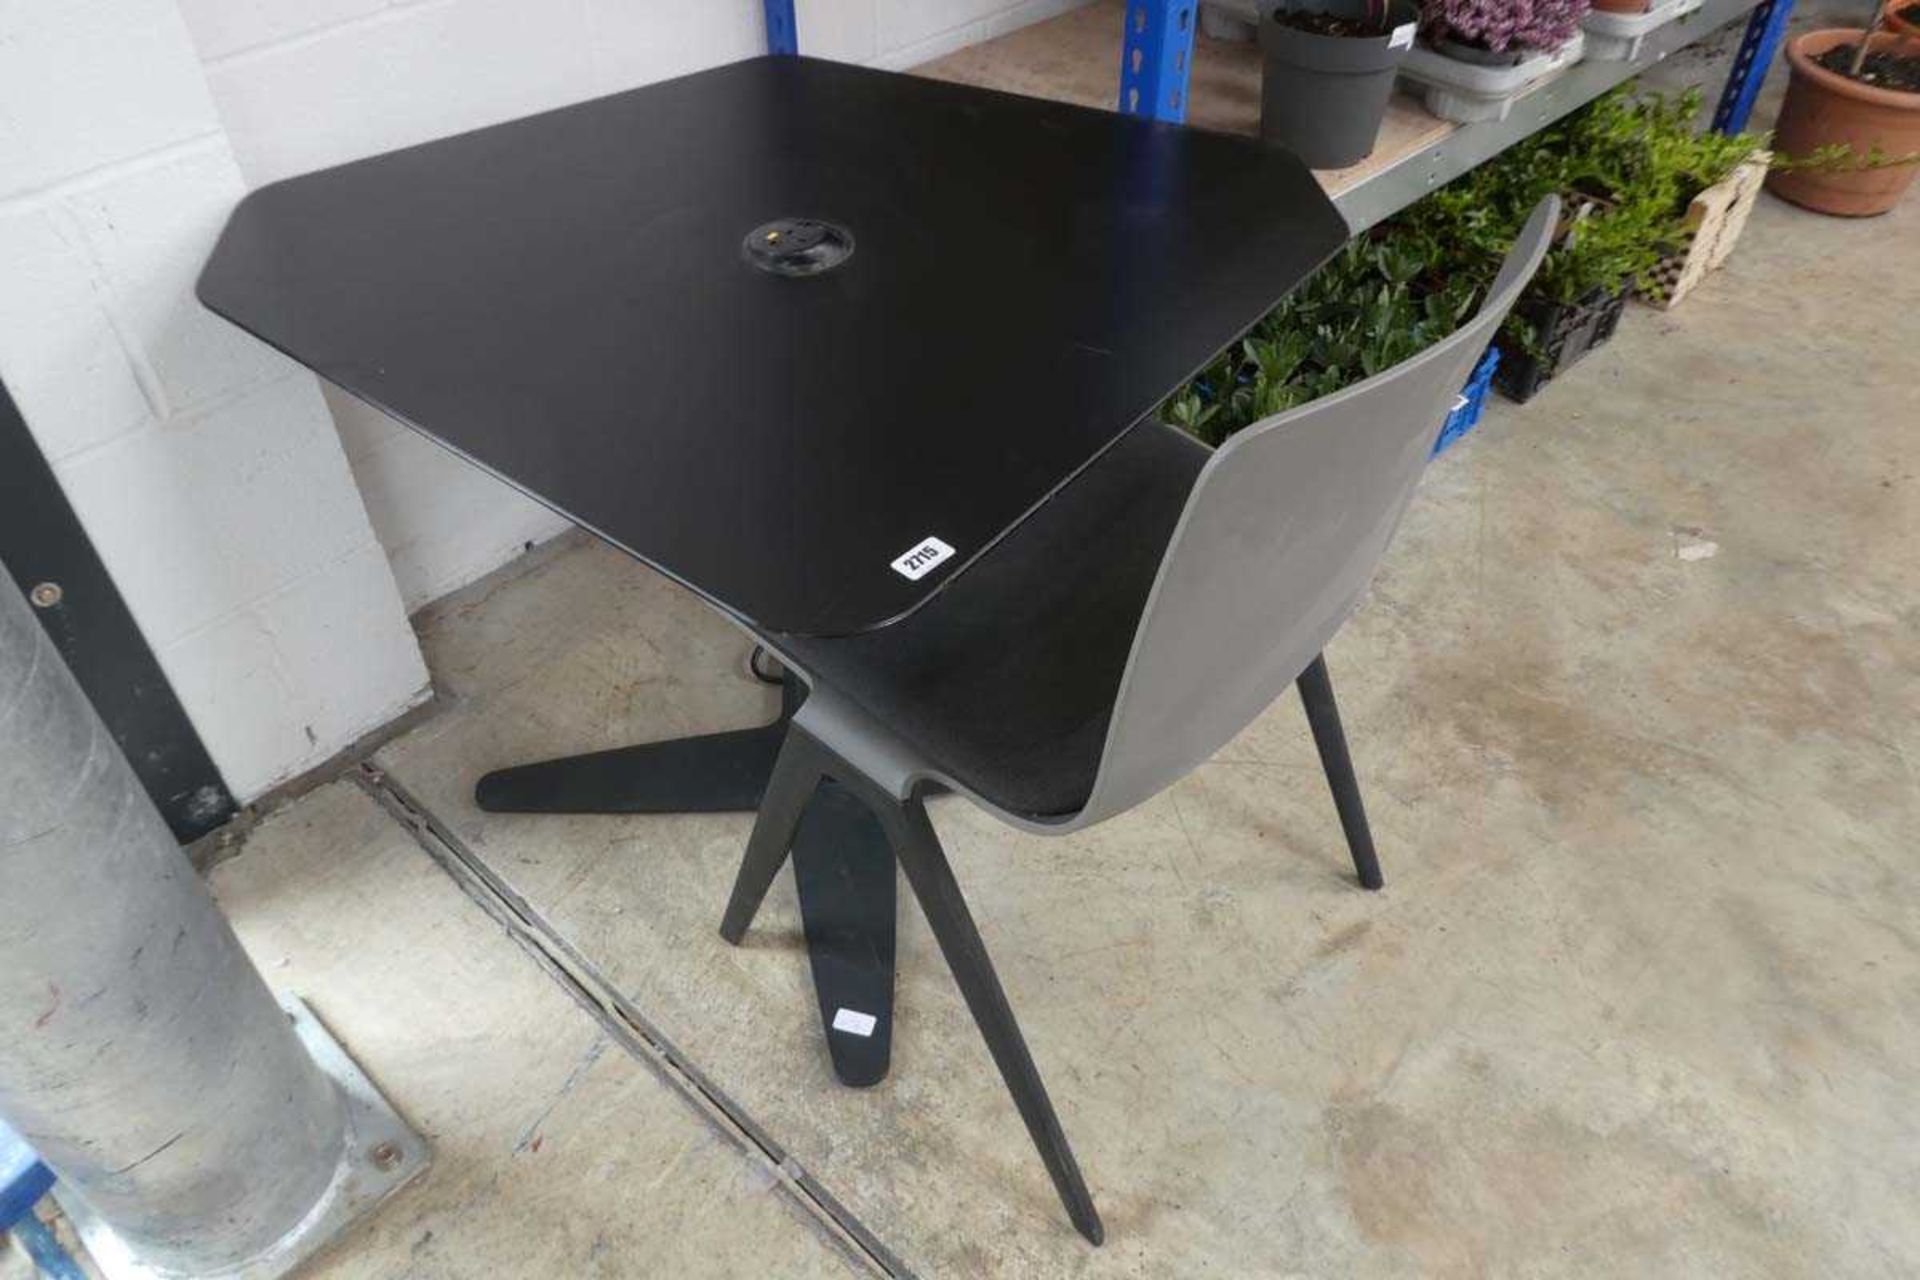 Black corner shaped desk with central power port together with grey soft cushioned chair